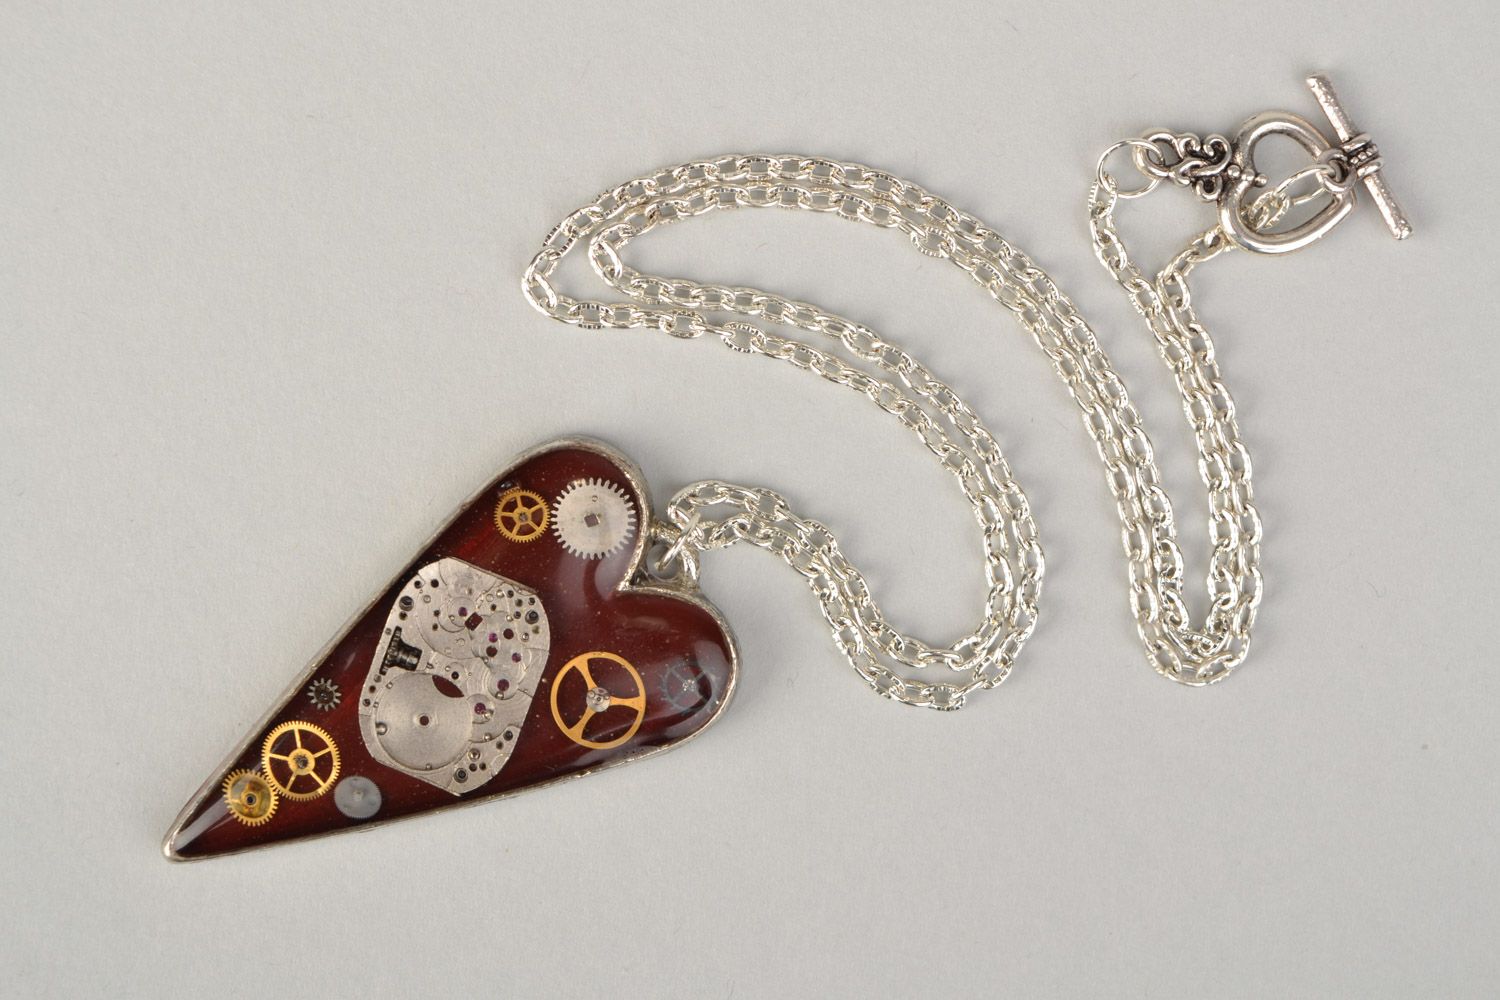 Handmade heart-shaped neck pendant in steampunk style with epoxy resin on chain photo 3